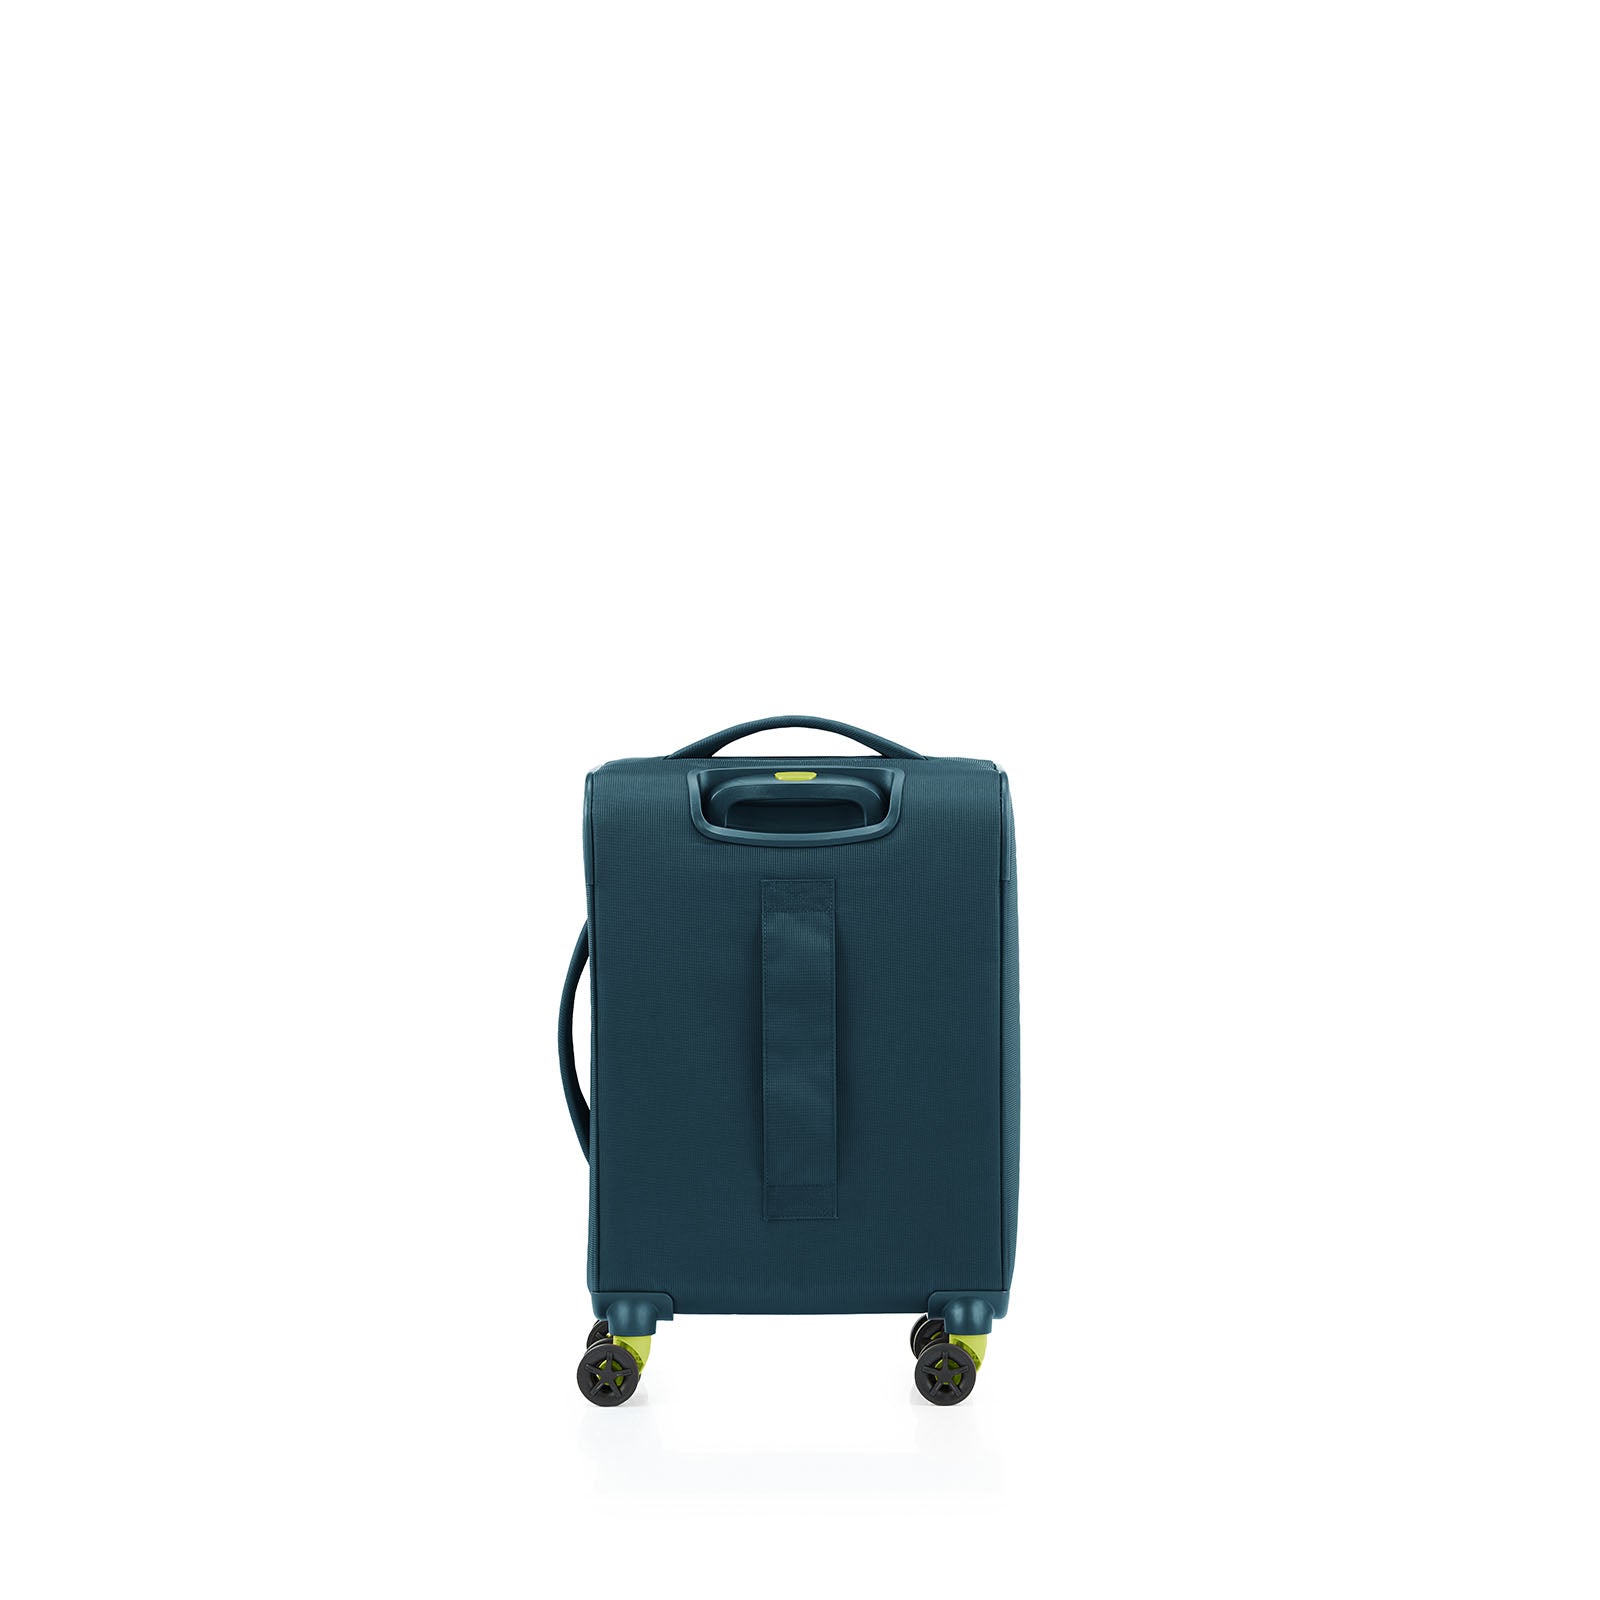 American-Tourister-Applite-4-Eco-55cm-Carry-On-Suitcase-Varsity-Green-Back